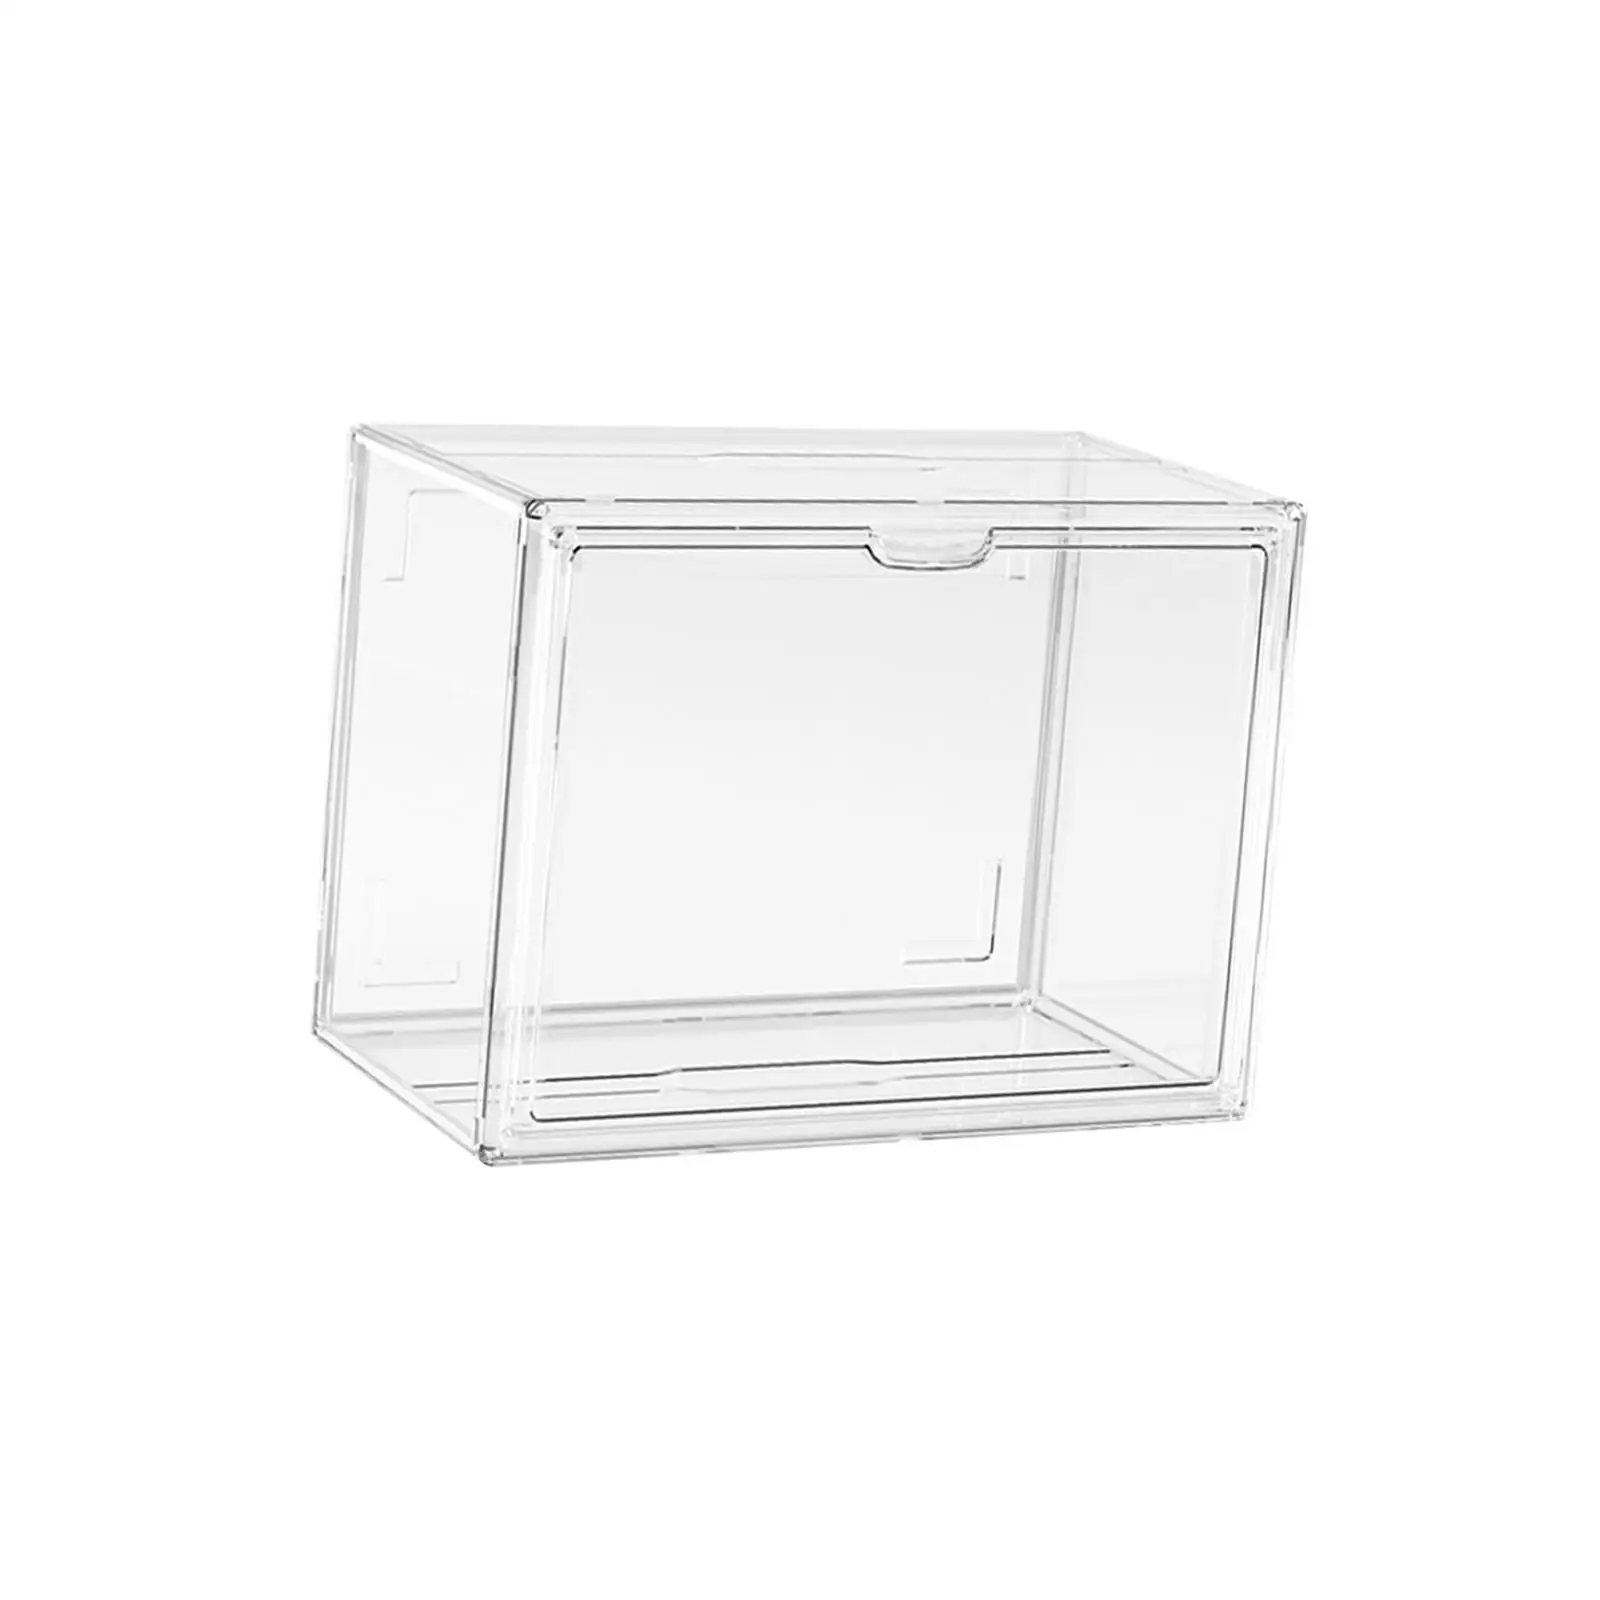 Display Case Dustproof Storage Holder Display Box for Collectibles Action Figures